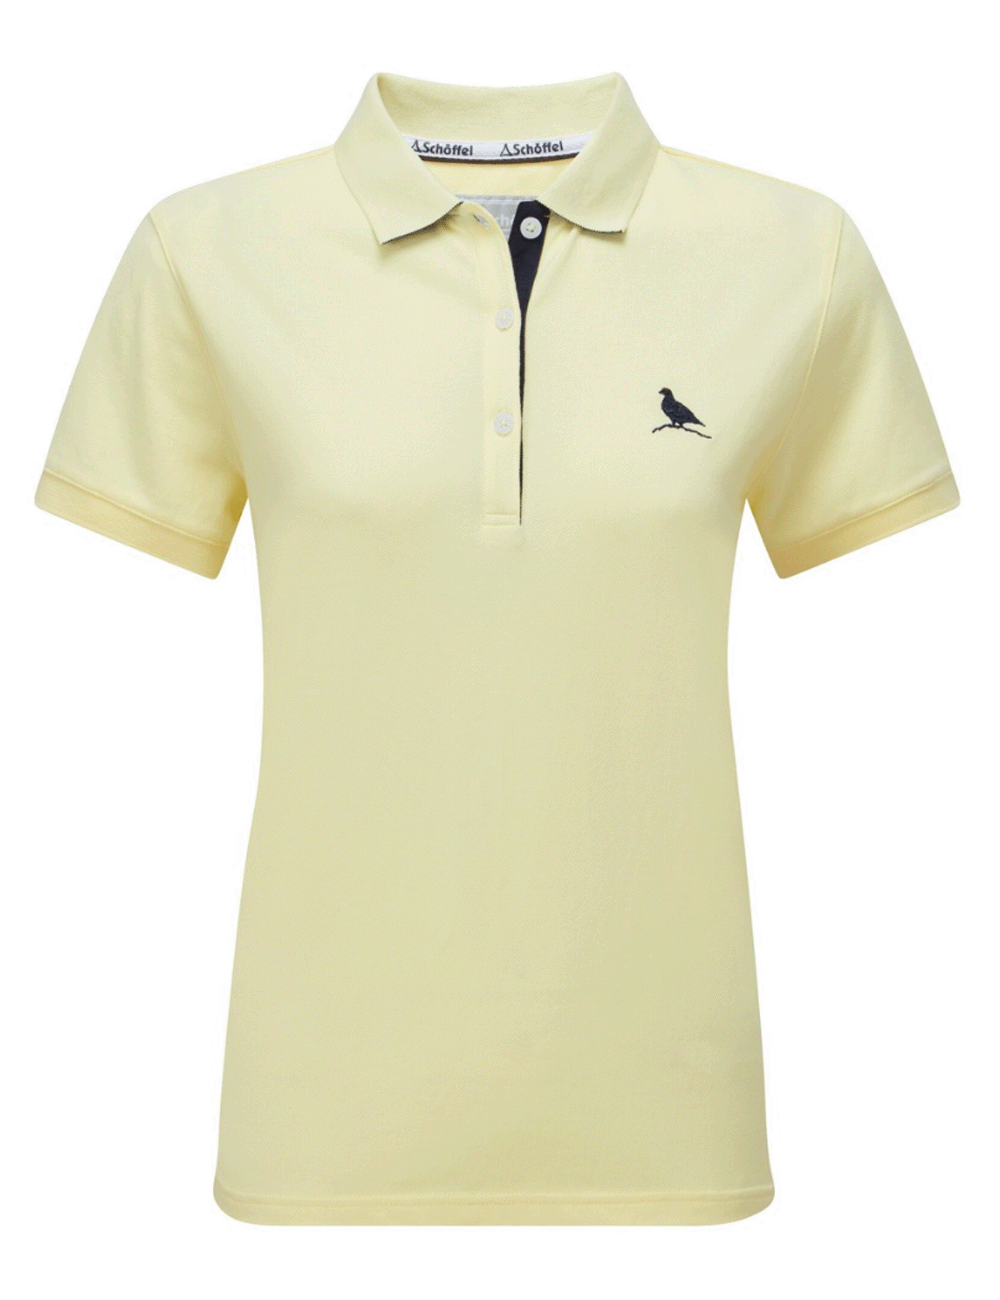 Schoffel's St. Ives Polo Shirt on a white background